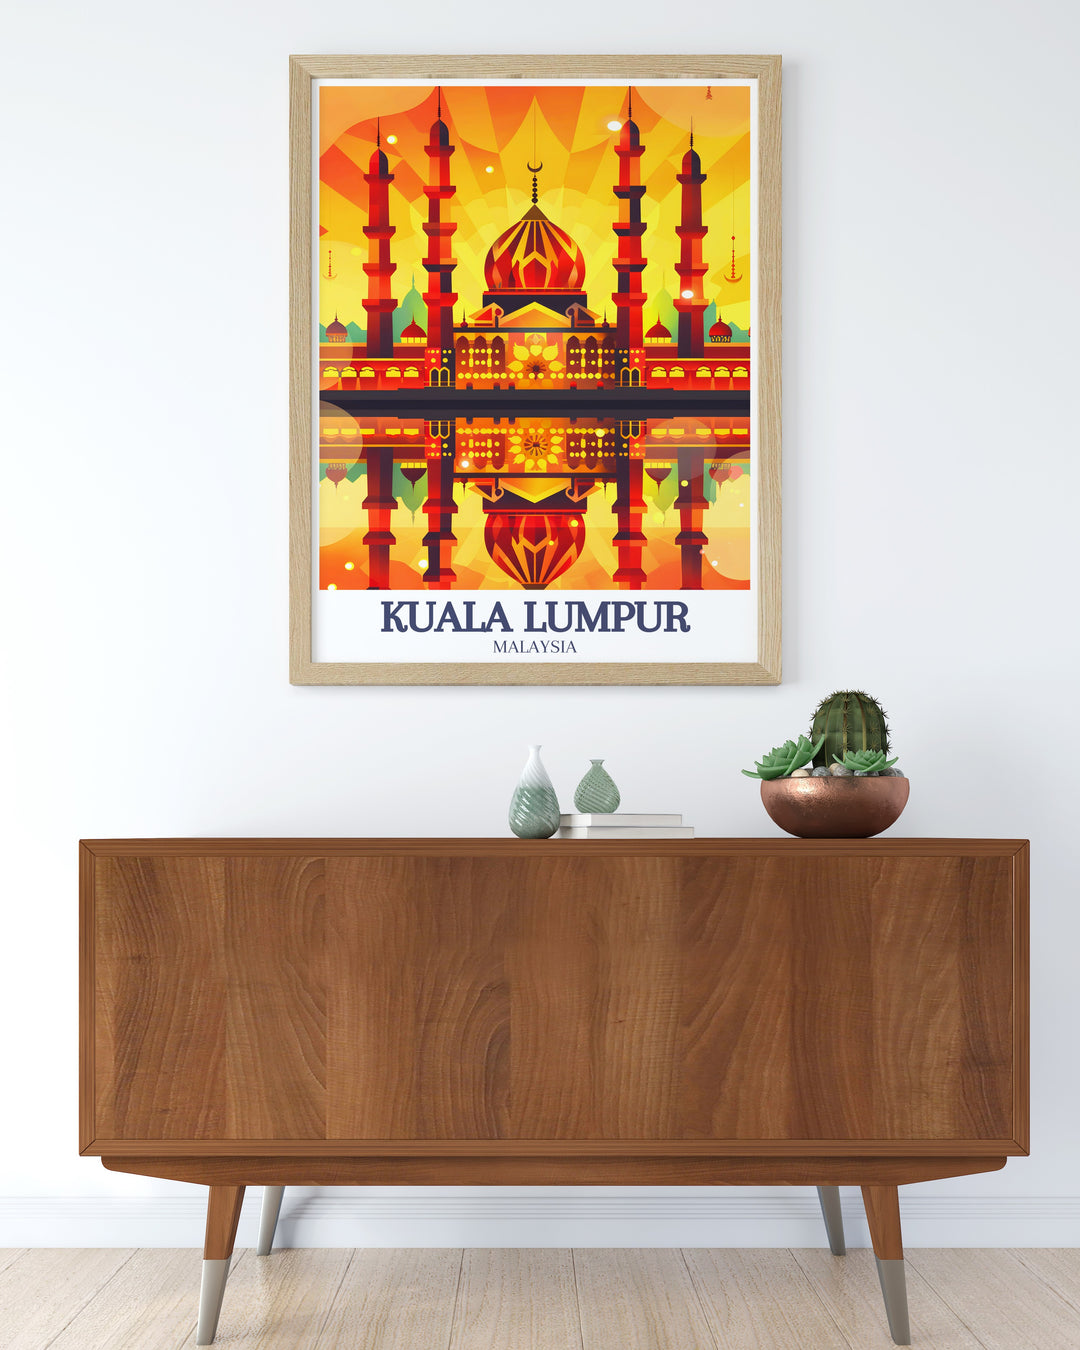 Sultan Salahuddin Abdul Aziz Mosque in Shah Alam poster for Malaysia decor enthusiasts. This Kuala Lumpur print captures the mosques elegance and is perfect for any home or office.